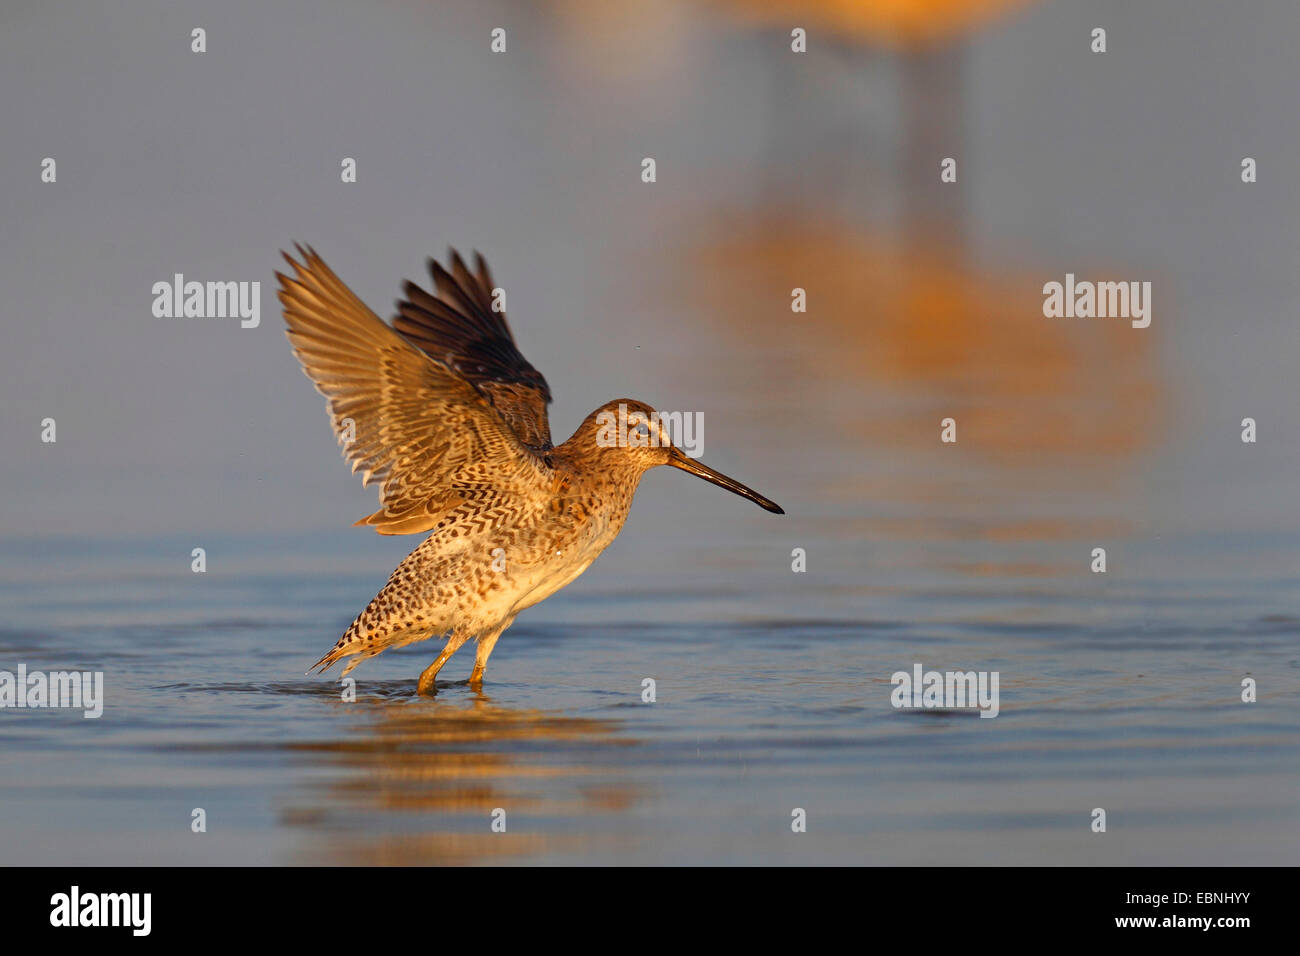 short-billed dowitcher (Limnodromus griseus), flies away from the shallow water, USA, Florida Stock Photo